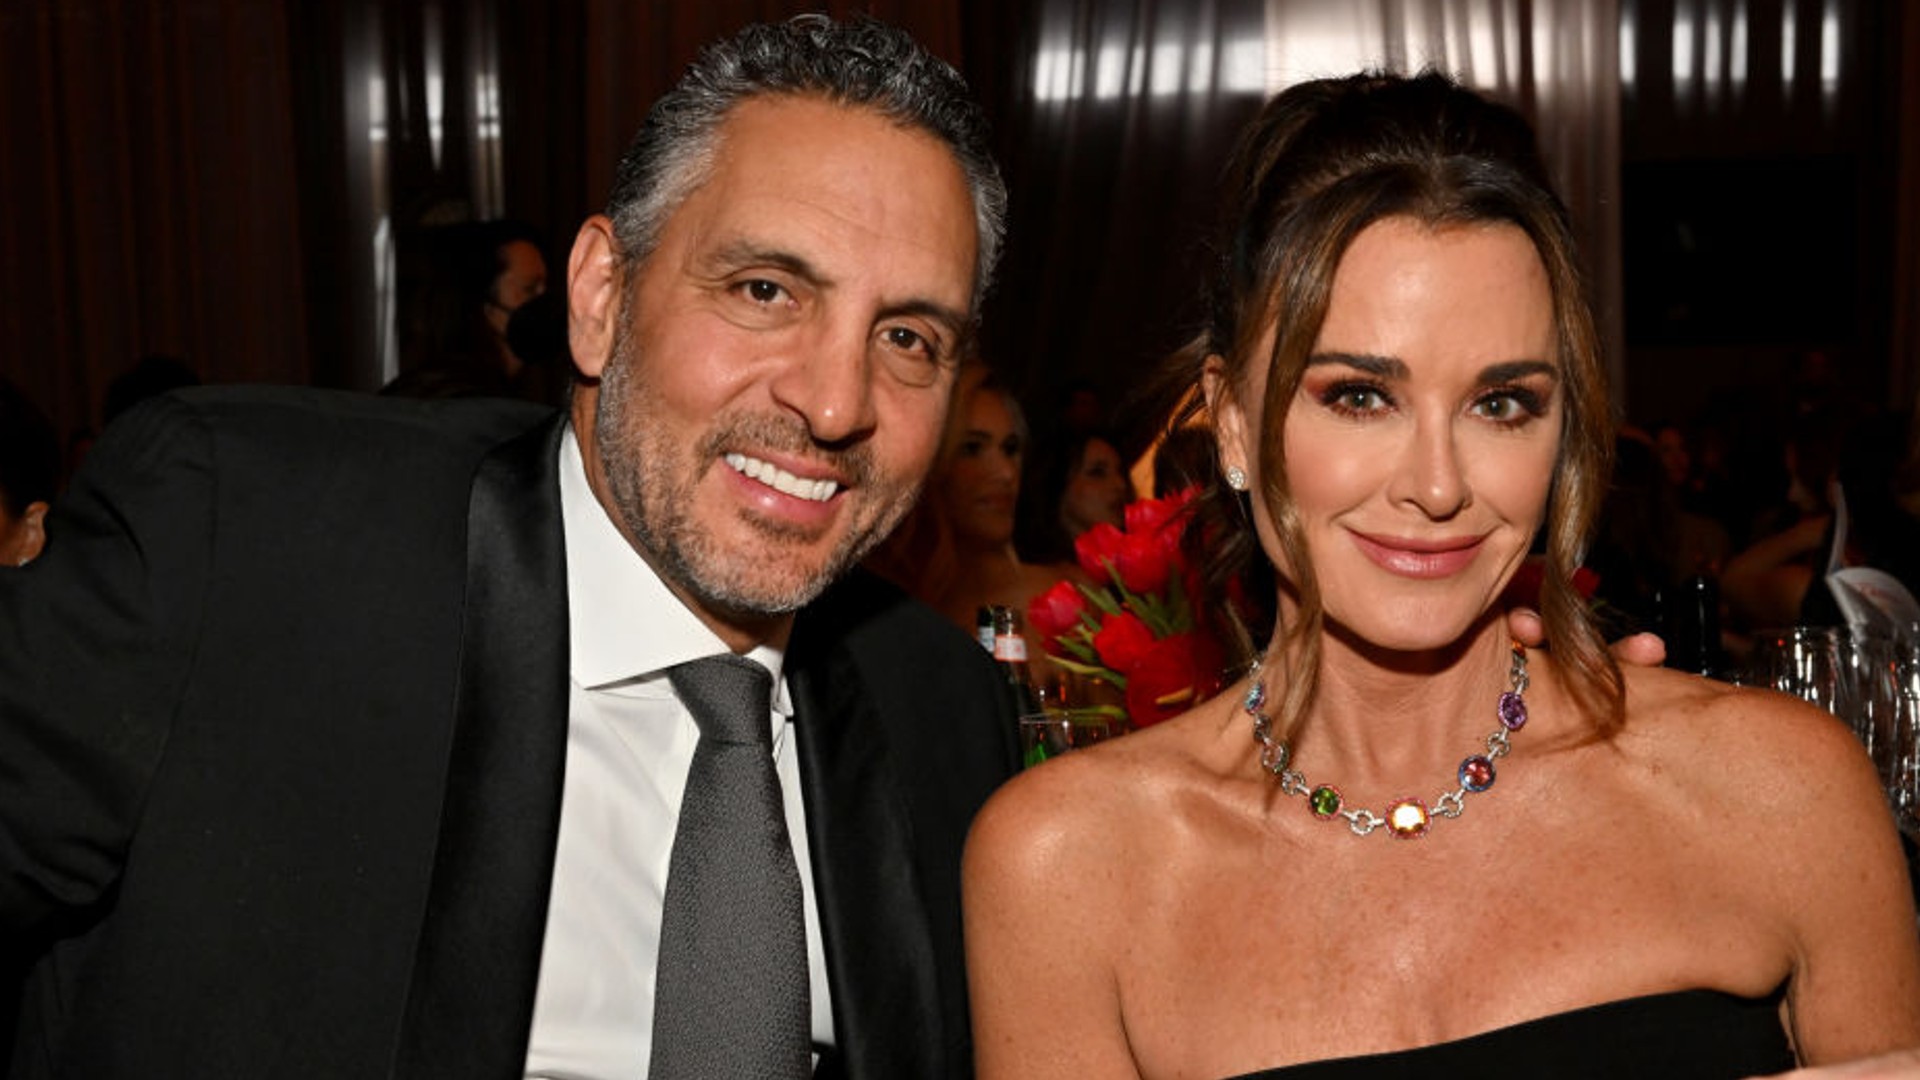 Oop! Kyle Richards Joins Mauricio Umansky In Aspen After His Shirtless Partying With Anitta Hits The Internet thumbnail